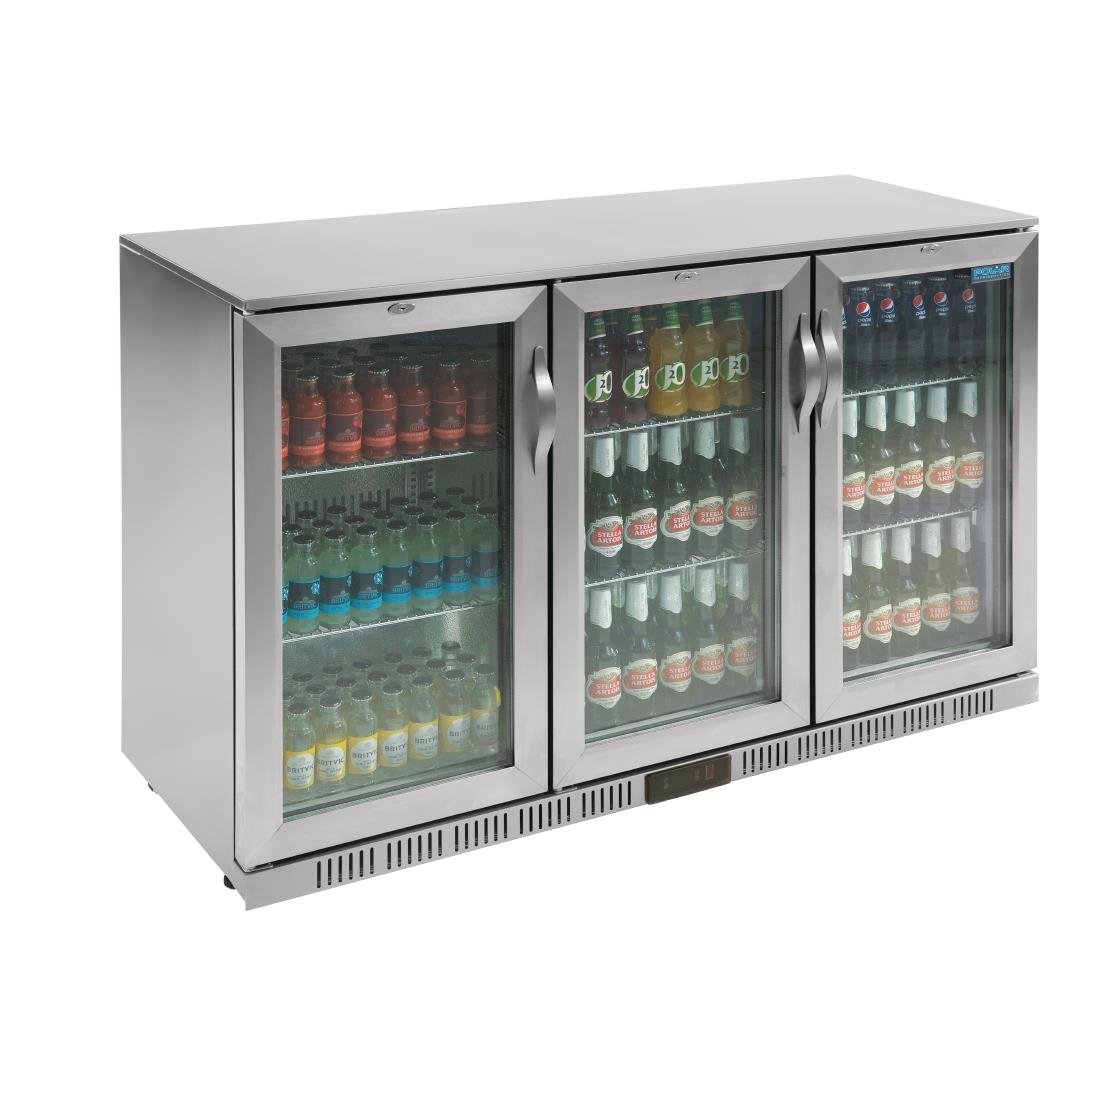 GL009 Polar G-Series Back Bar Cooler with Hinged Doors Stainless Steel 330Ltr GL009